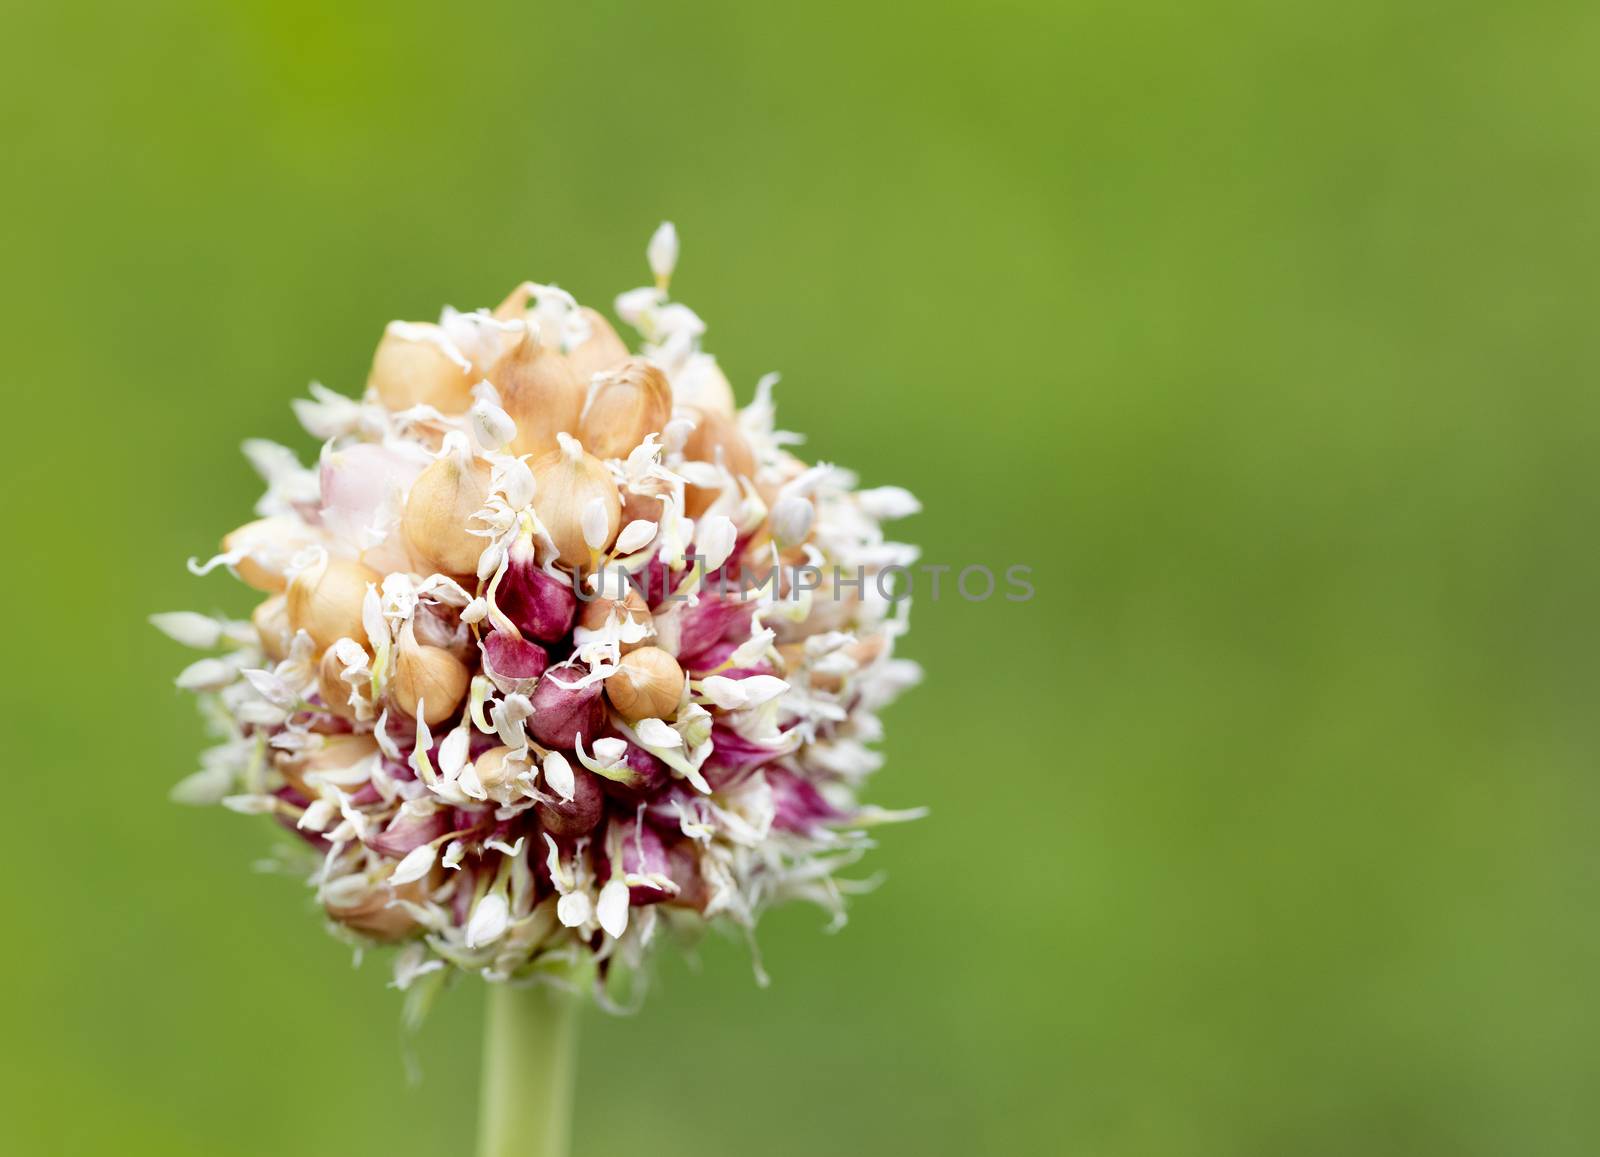 Young garlic stalk close-up with pink flowers seeds on natural green background.